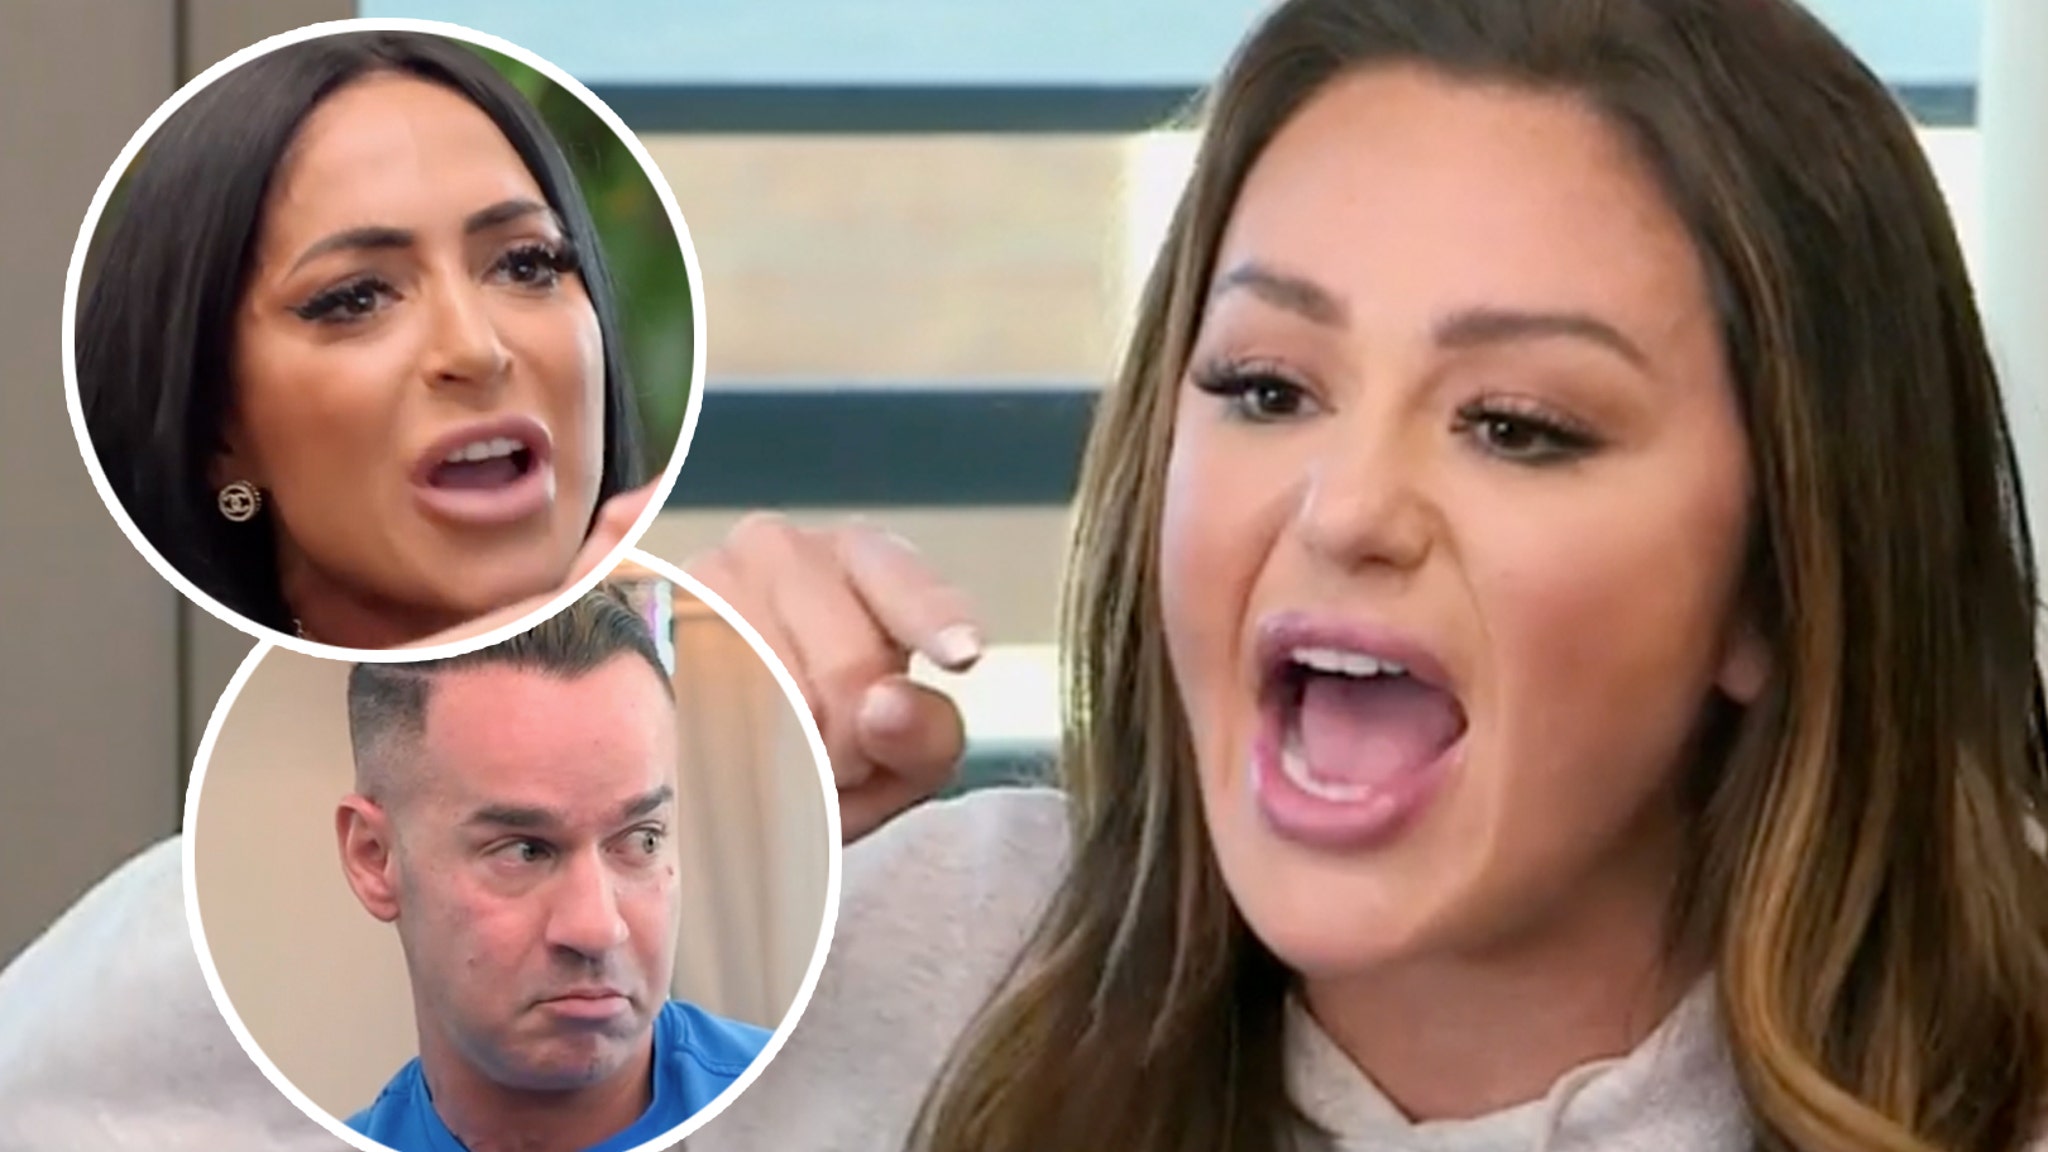 All Hell Breaks Loose as JWoww, Angelina and The Situation Fight Explodes on Jersey Shore Family Vacation